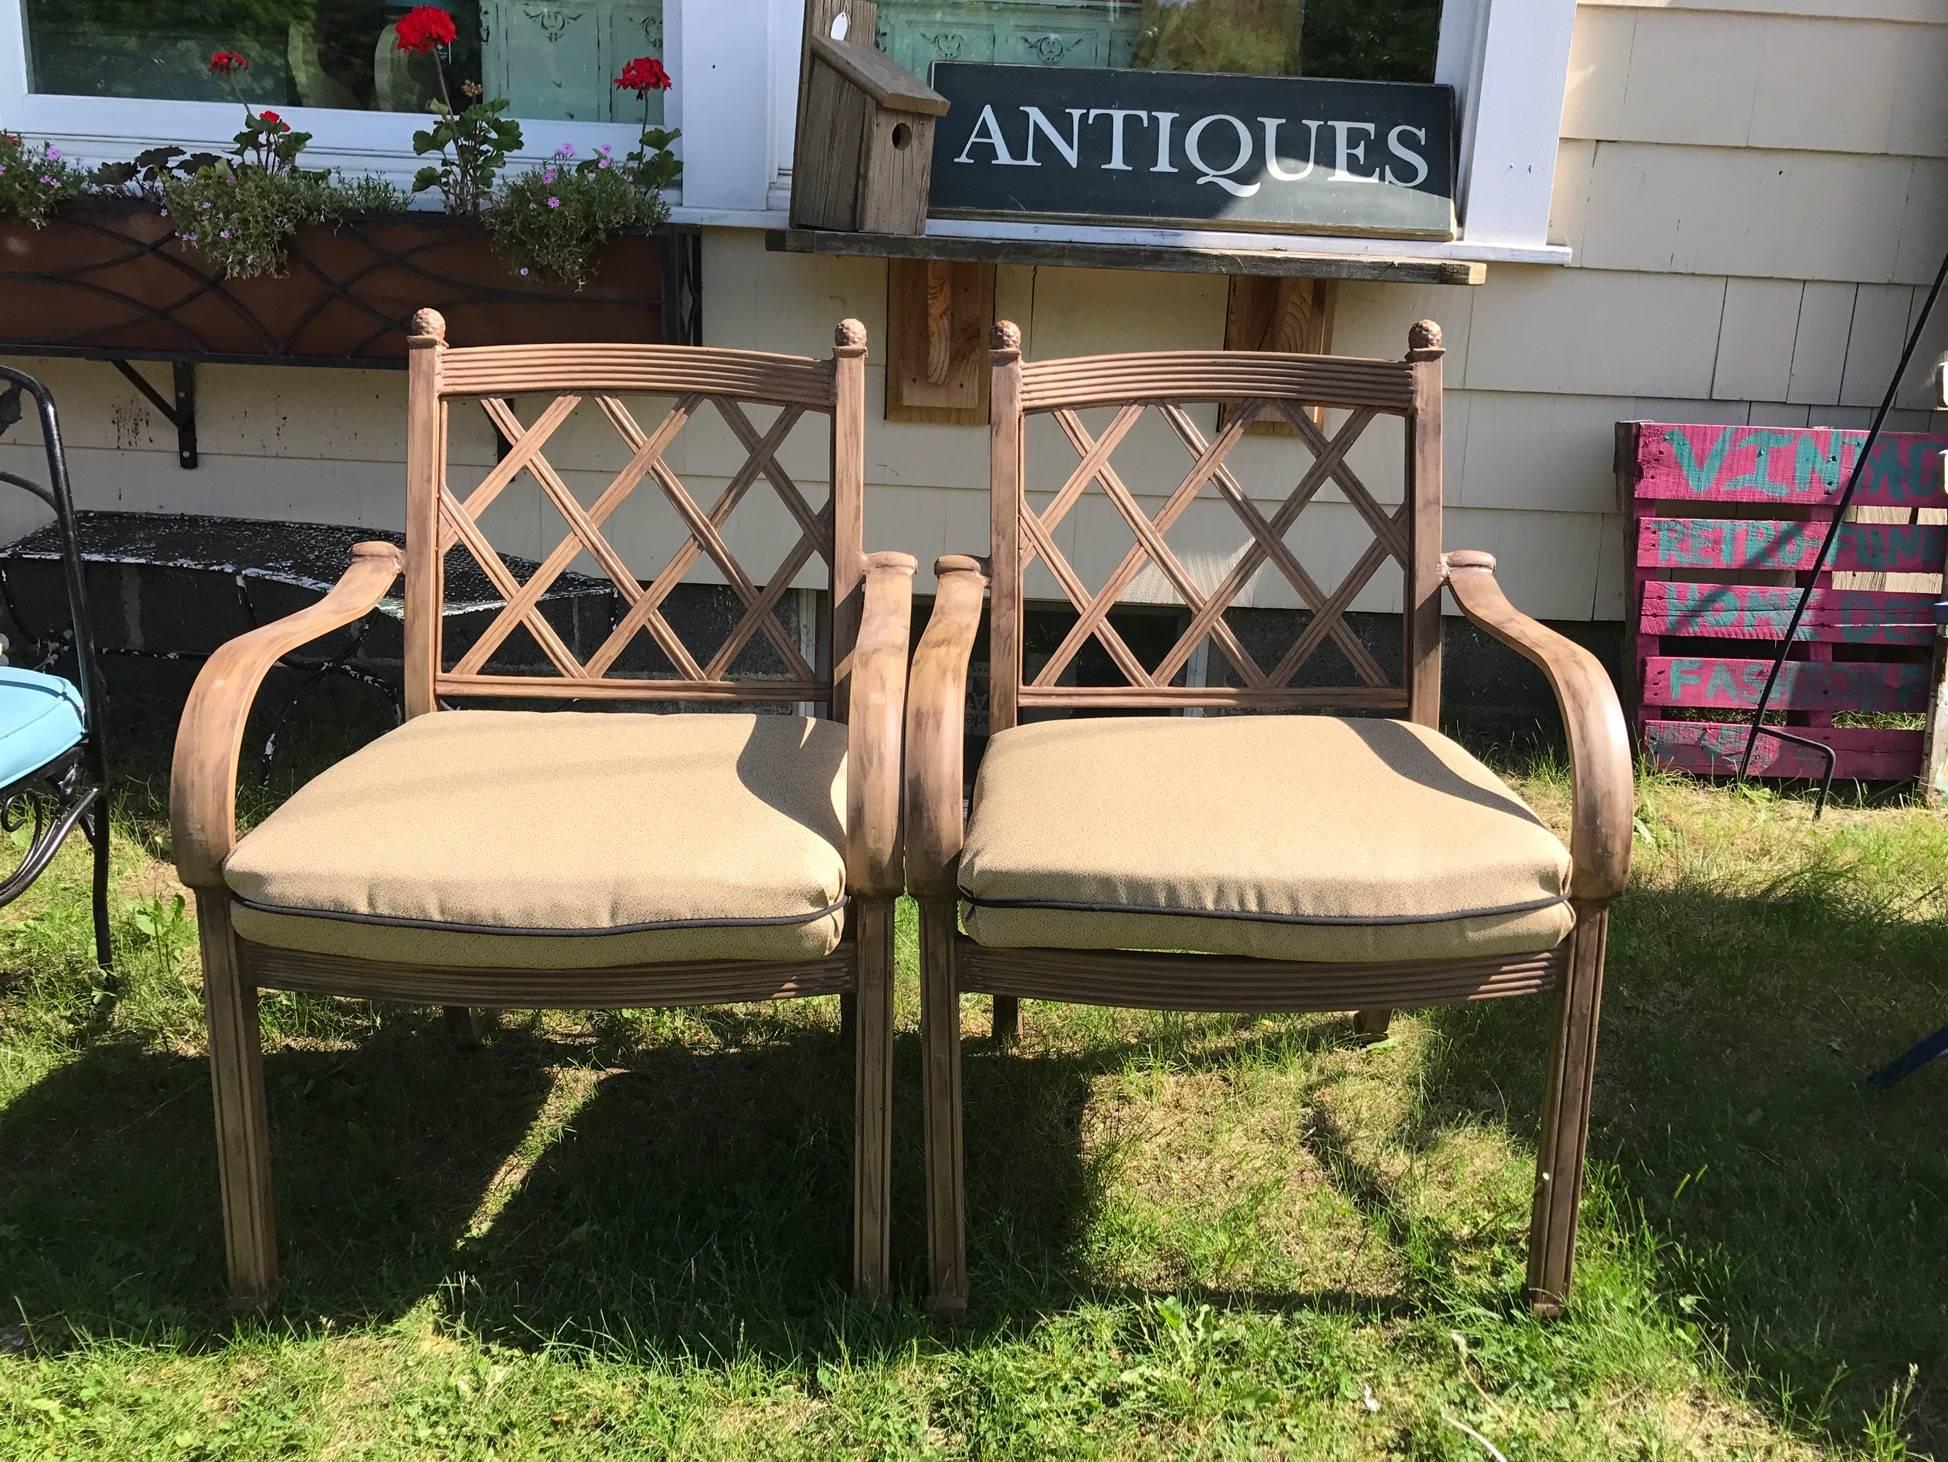 Two chairs with ultra clean cushions. This set seems to be aluminum and in excellent condition. A smoked glass tabletop is included in this great outdoor set. 

chair dimensions: 
H- 33.5 x L-24 x D-18.5 x SH-15.5.